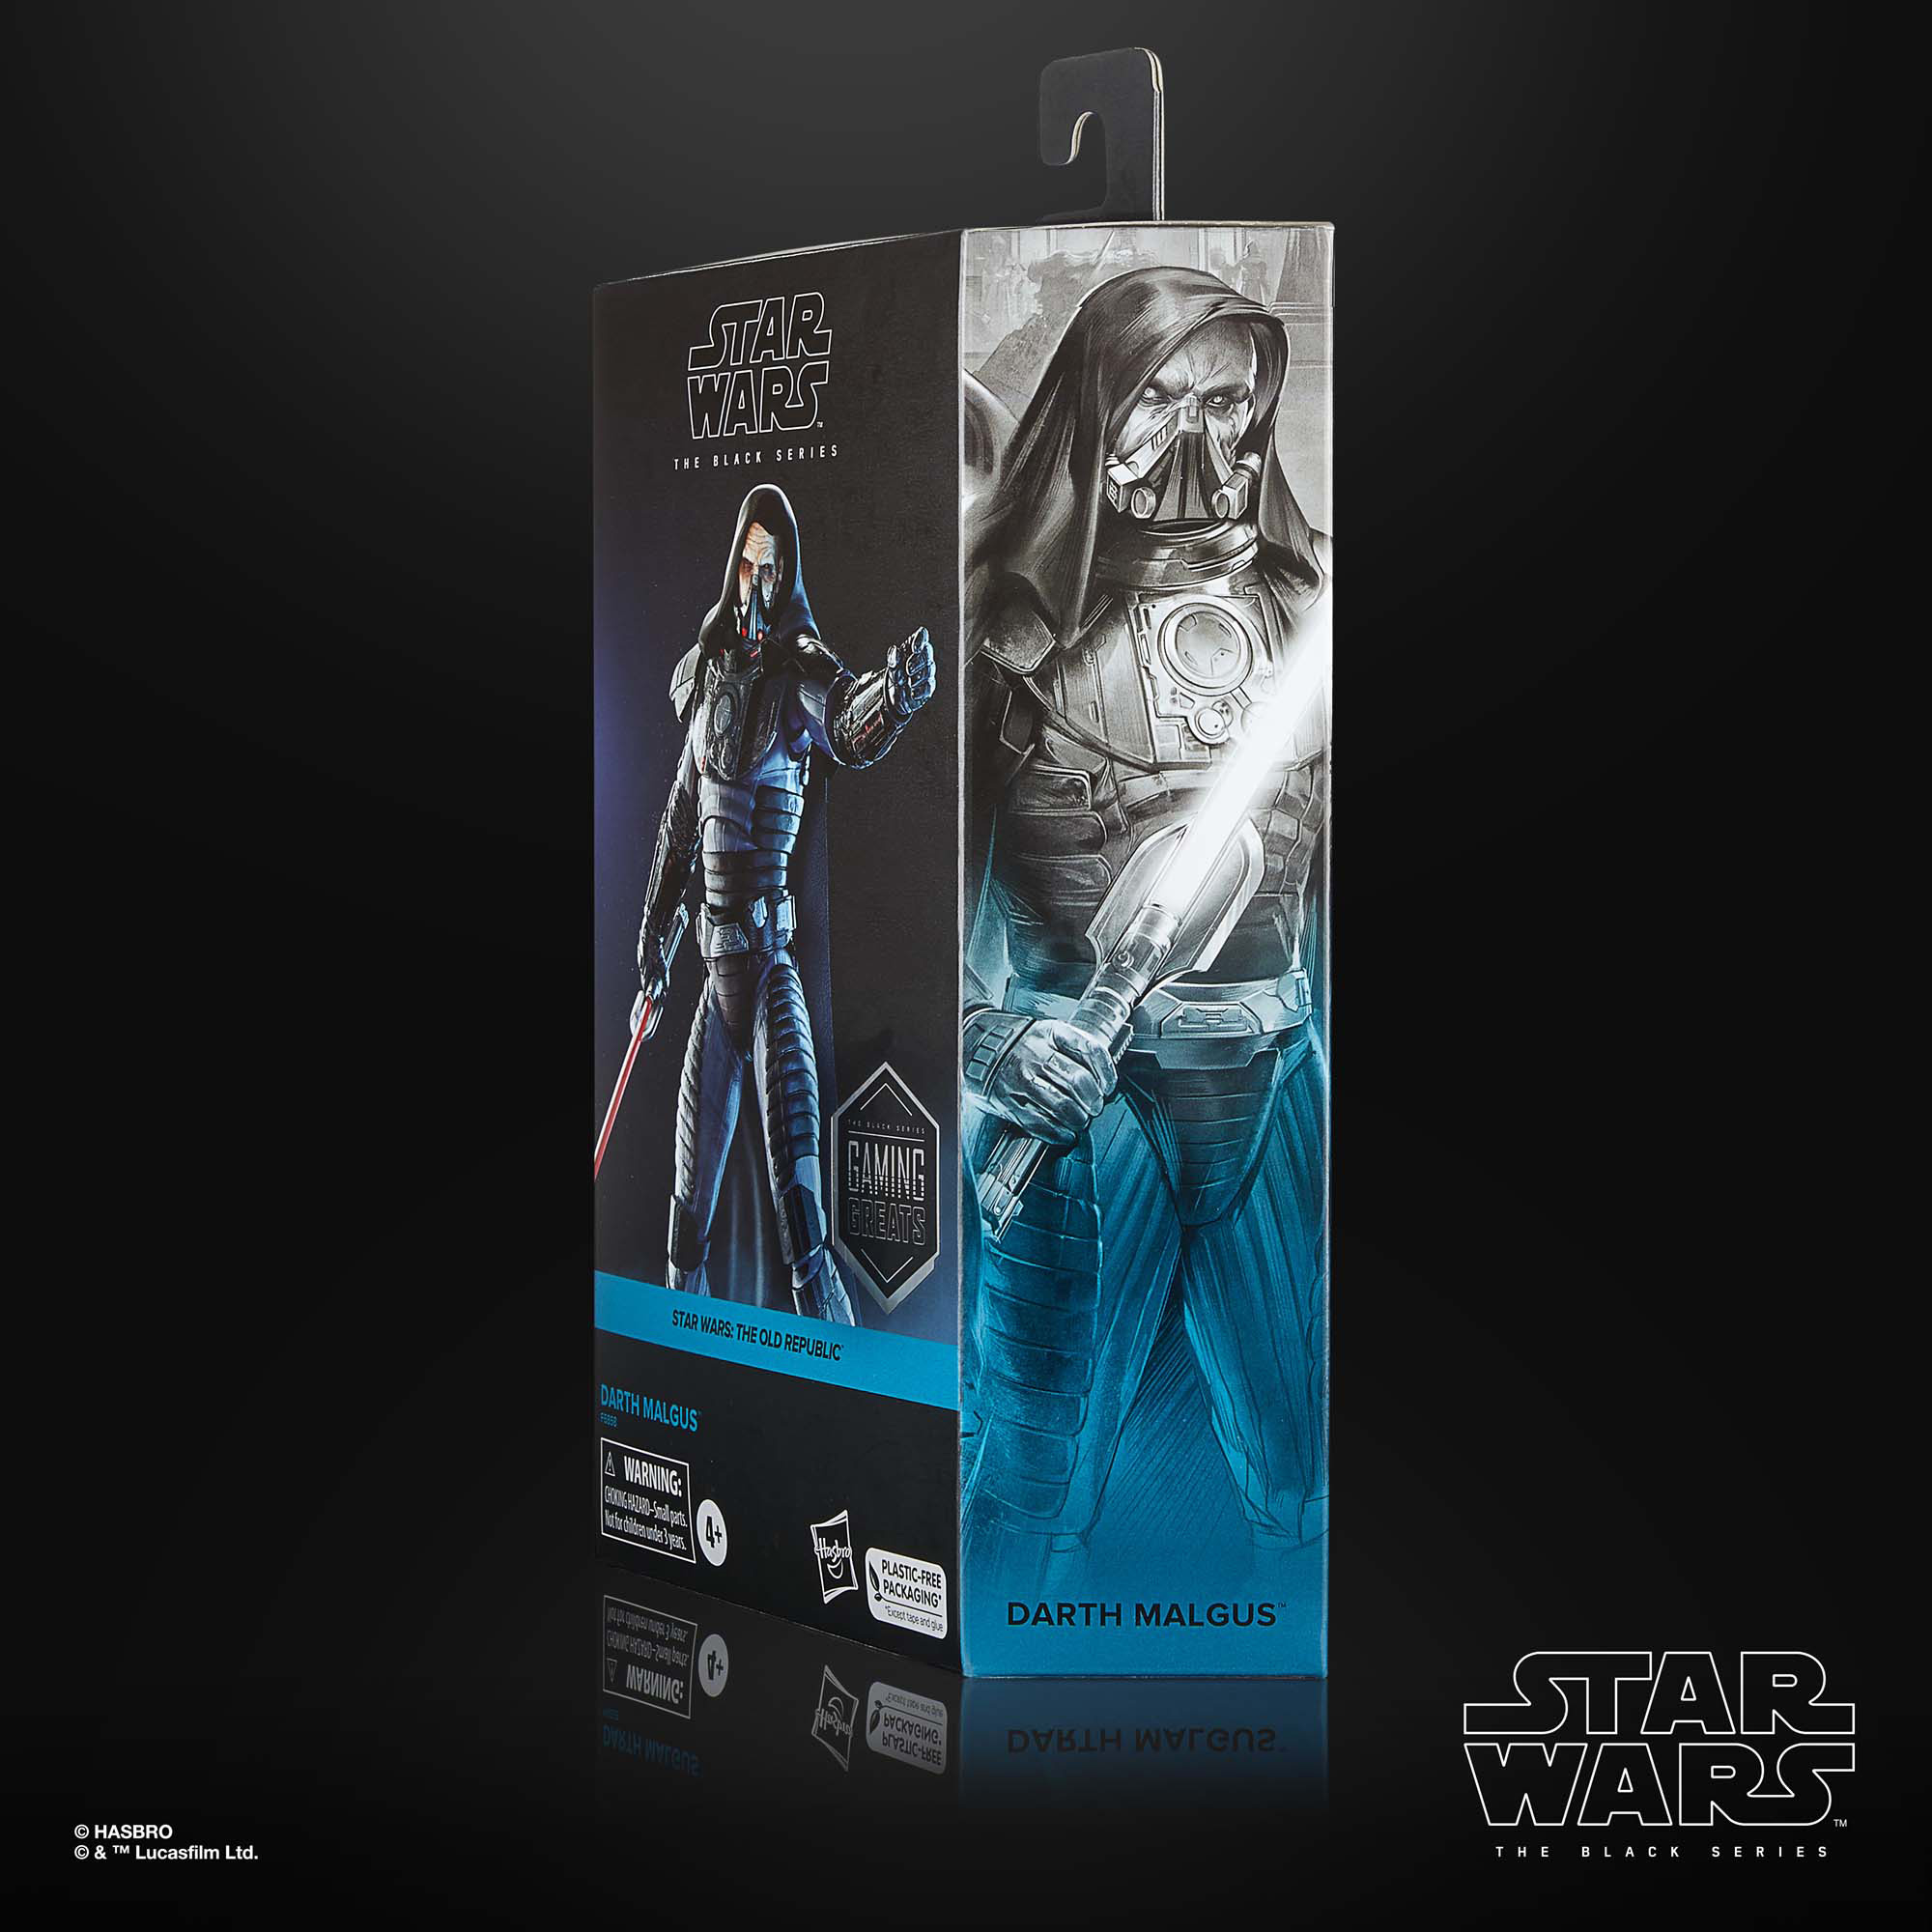 Press Release 5/3/23 - New The Black Series 6-Inch Deluxe Gaming Greats Reveals